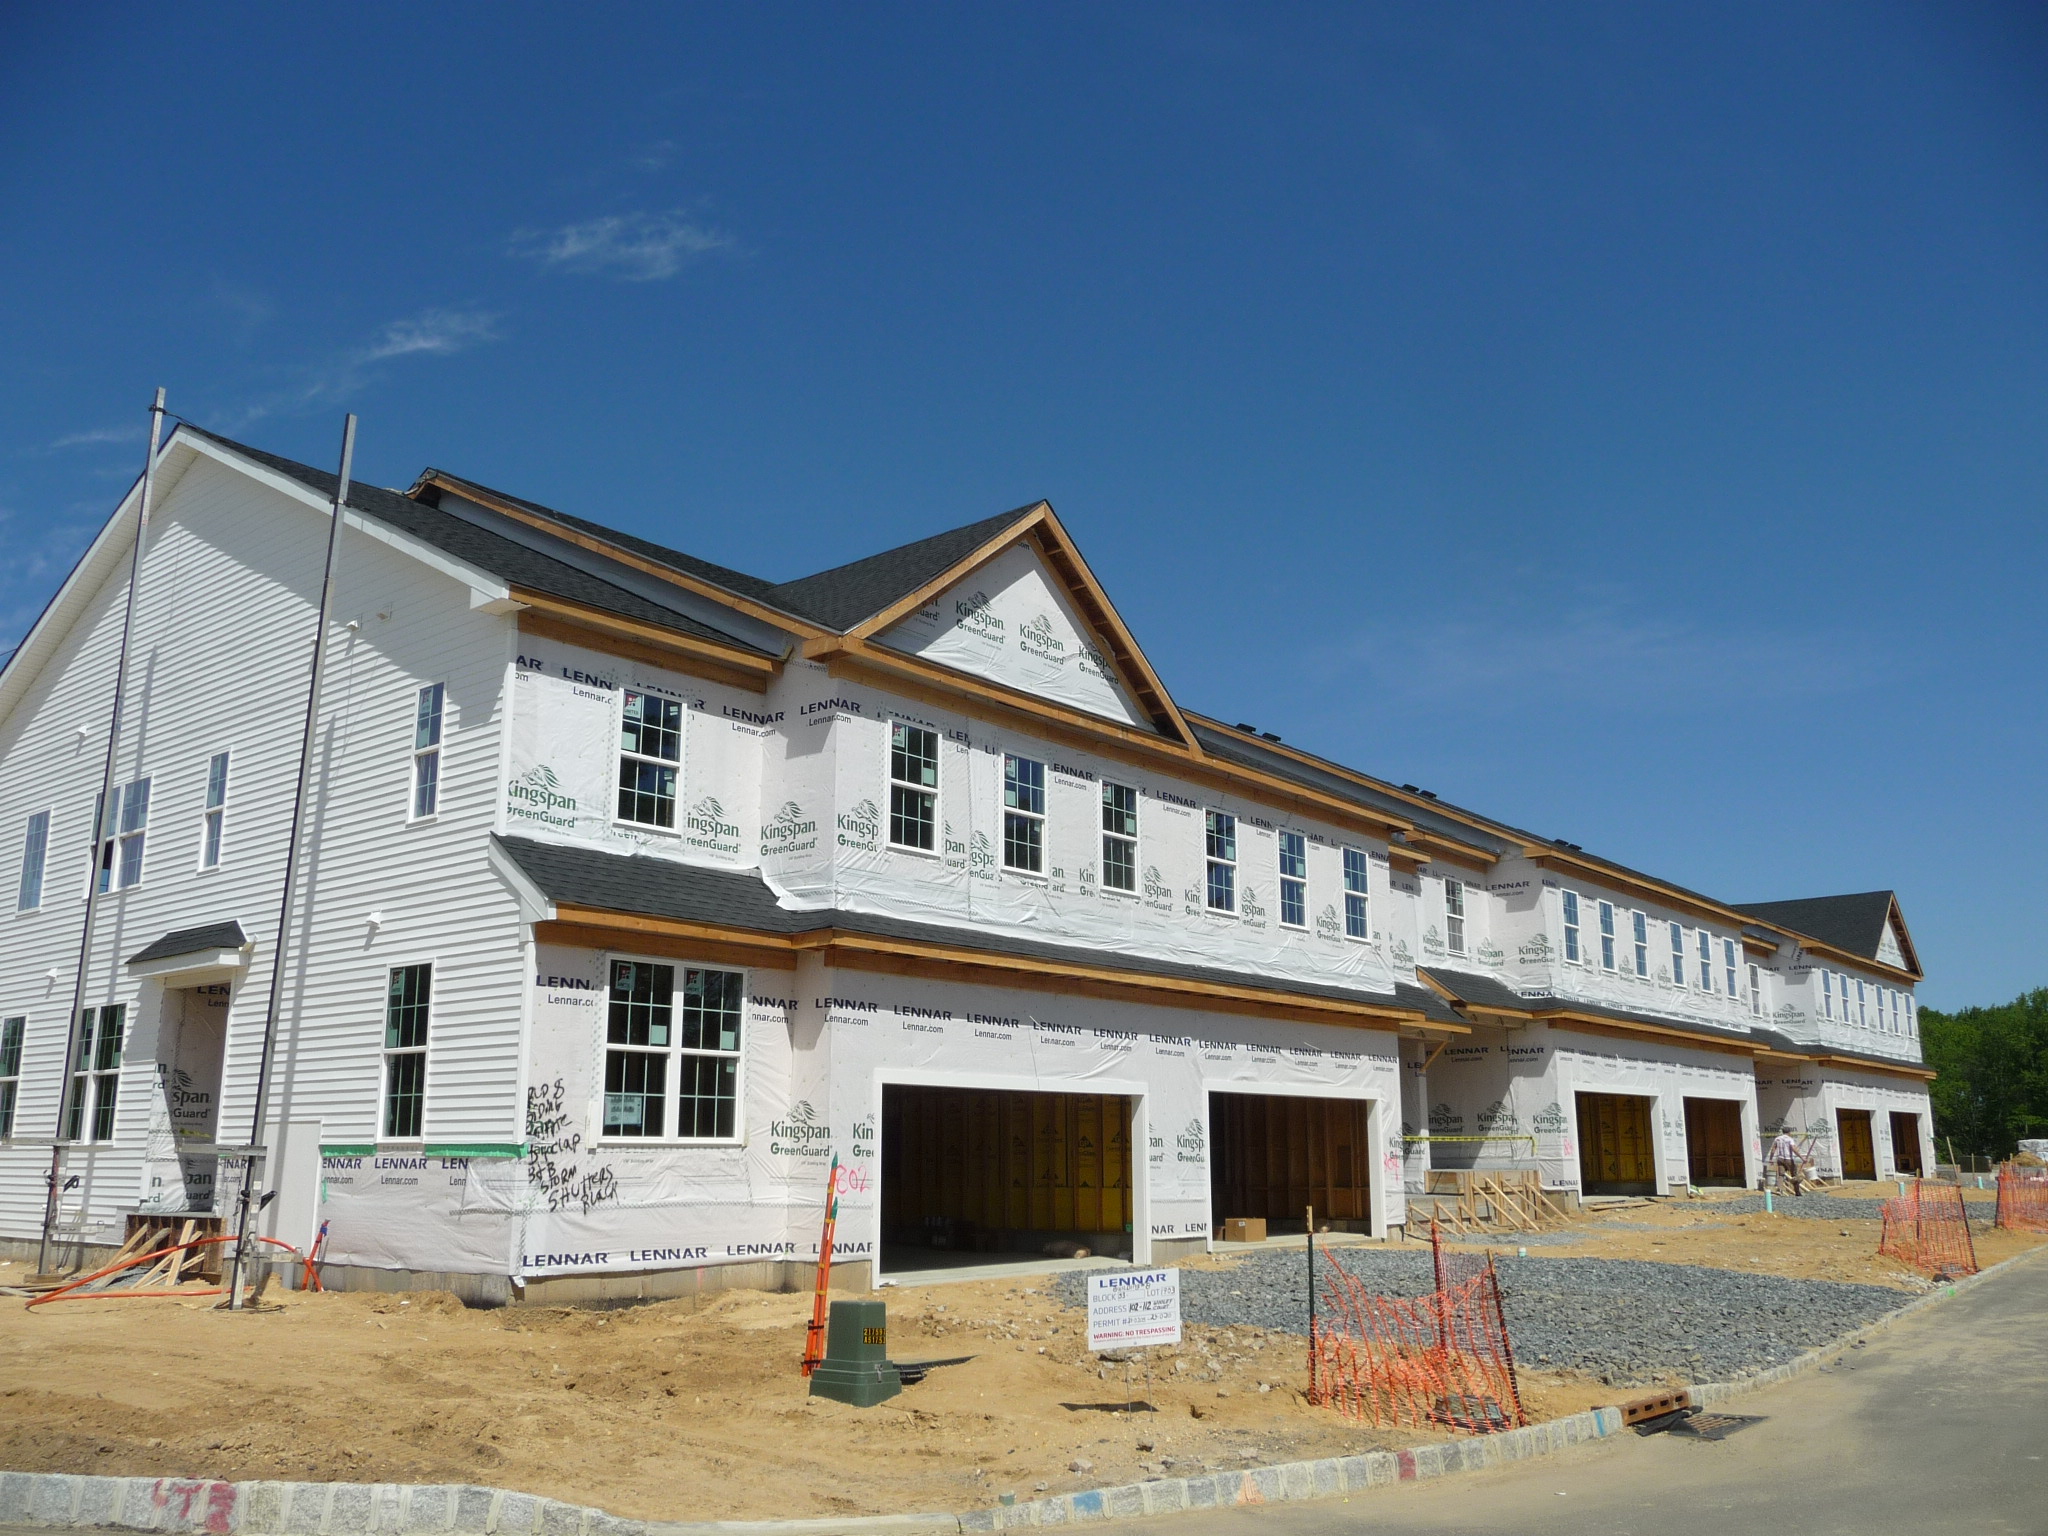 The first group of townhouses under construction in 2023 at The Parke at Ocean in Ocean, NJ.